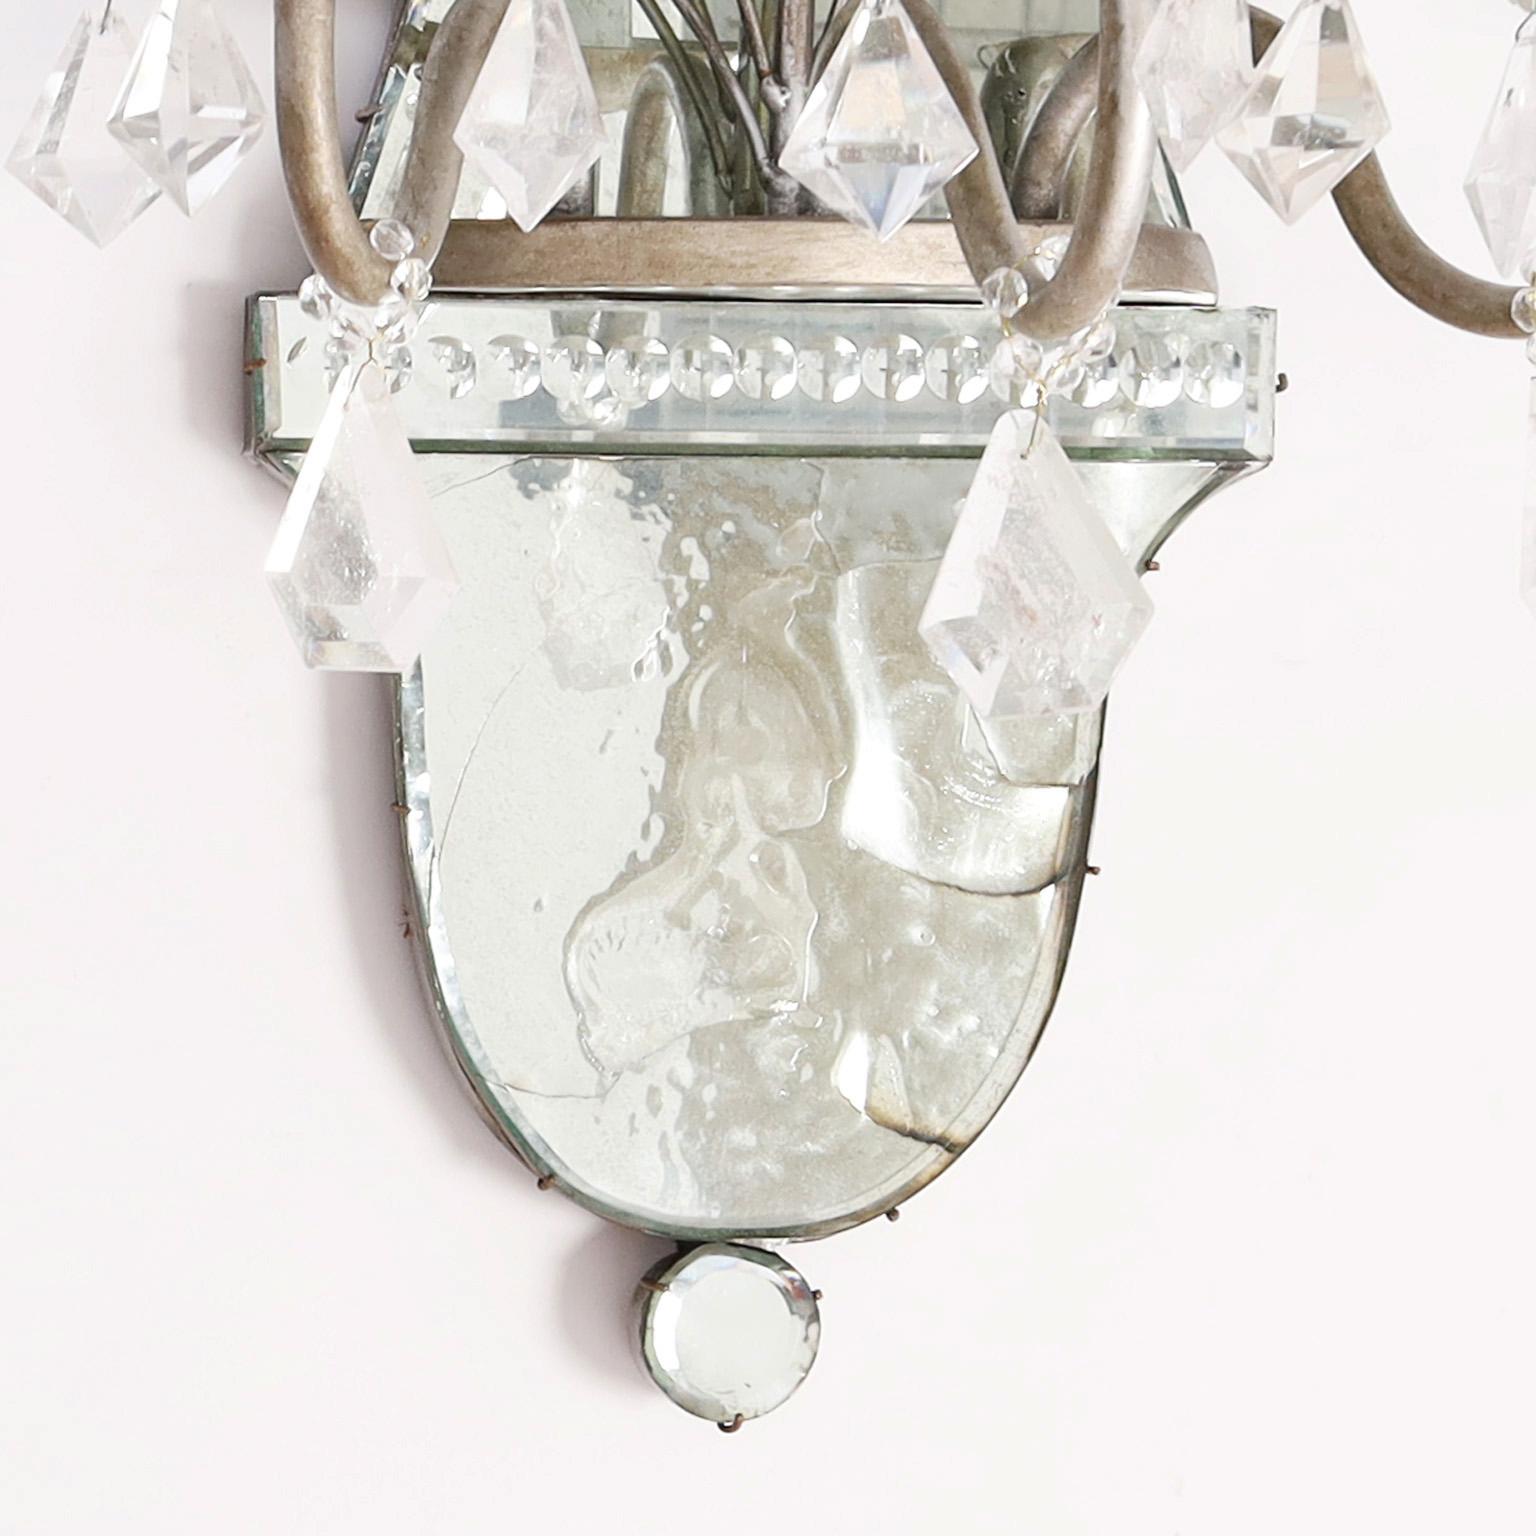 Pair of Mid-Century Italian Mirrored Wall Sconces with Rock Crystals For Sale 3